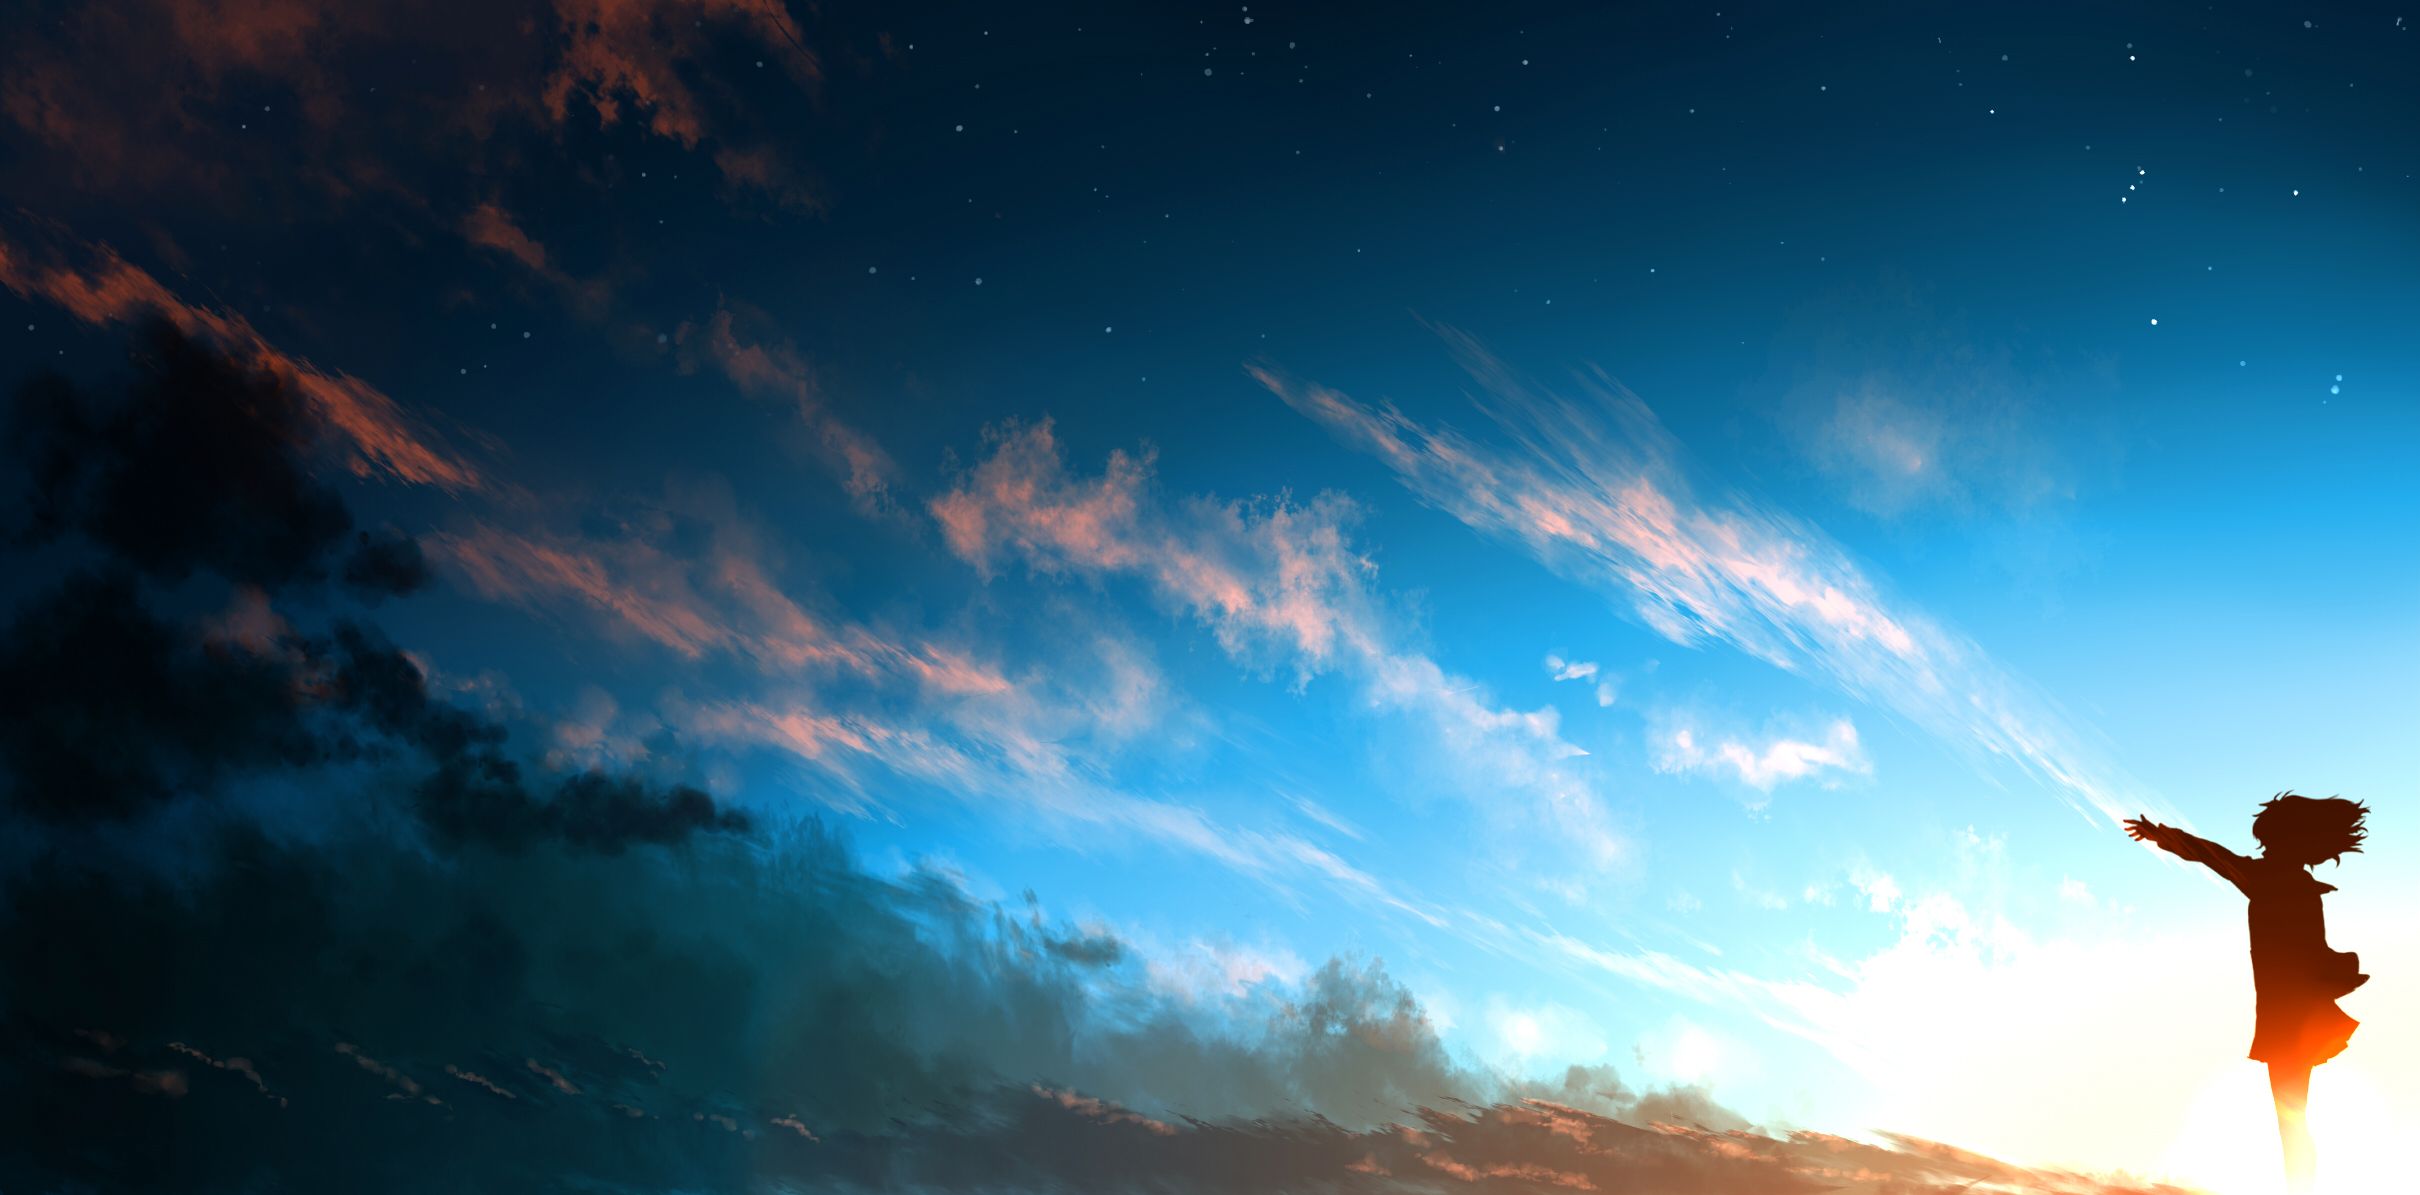 A Small Starry Sky For The Hand By Moody Hd From Gallsource - Kyoukai No Kanata Background , HD Wallpaper & Backgrounds